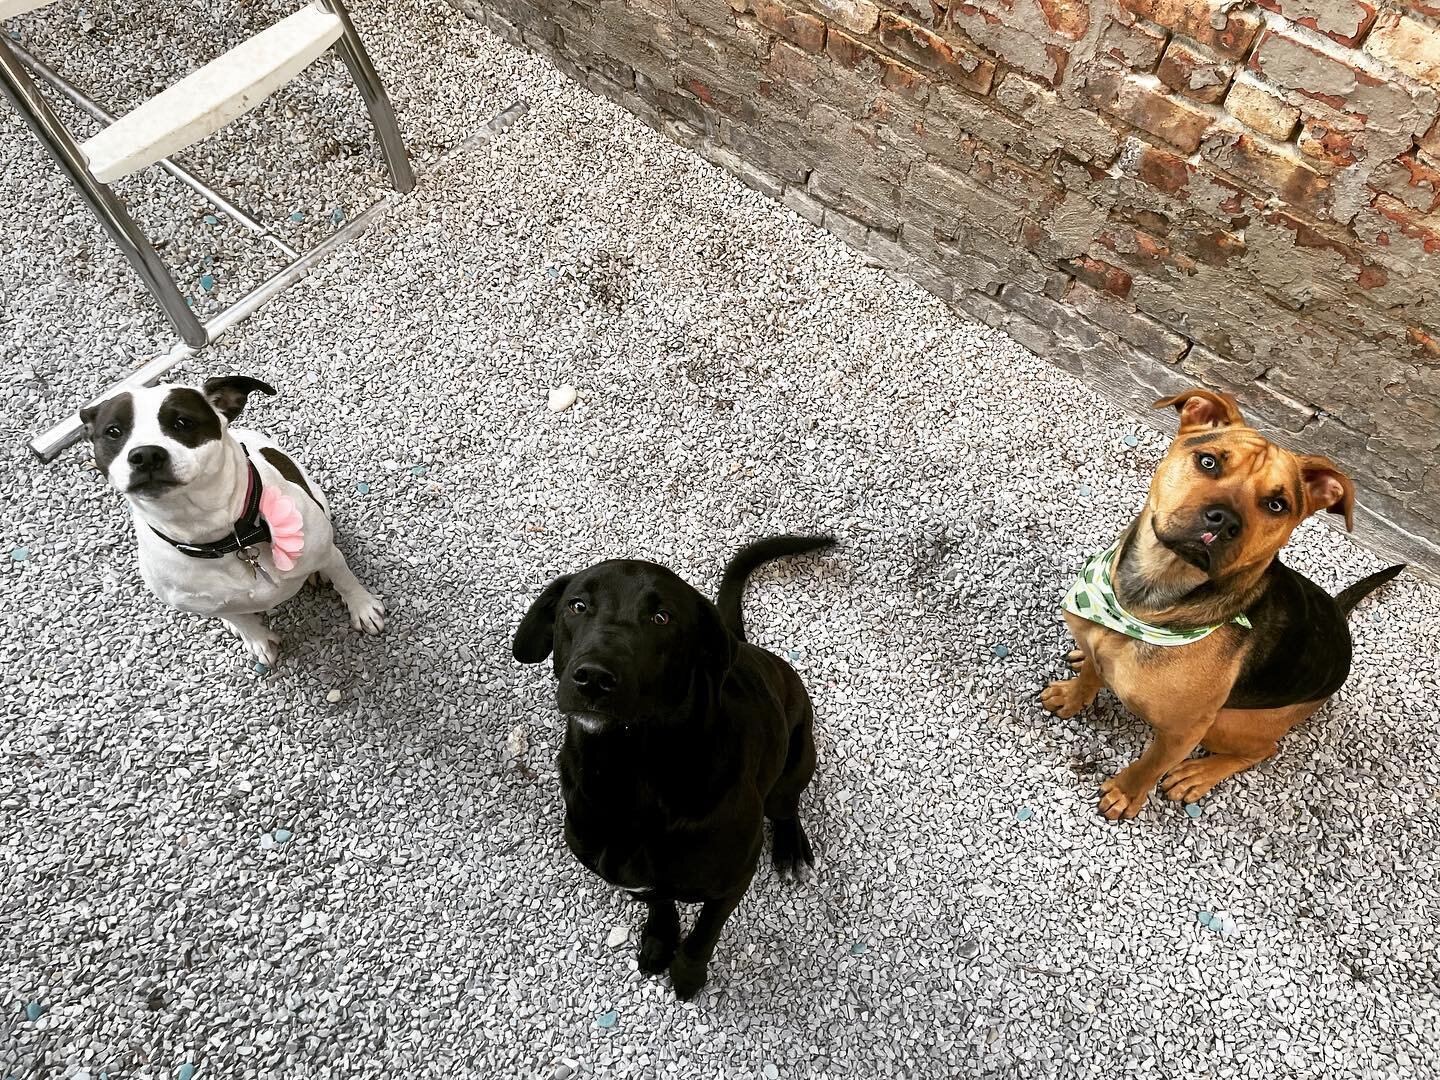 Three stooges! Ramona, Debbie And Krypto stopped for a pose. Talk about hard work lololol 😅
.
.
.
.
#bowwowmeowpurrfessionalpetcare #bowwowbarkery #dogs #chicago #chicagodogs #Dogsofinstagram #cats #glutenfree #organic #petcare #pets #catsofinstagra